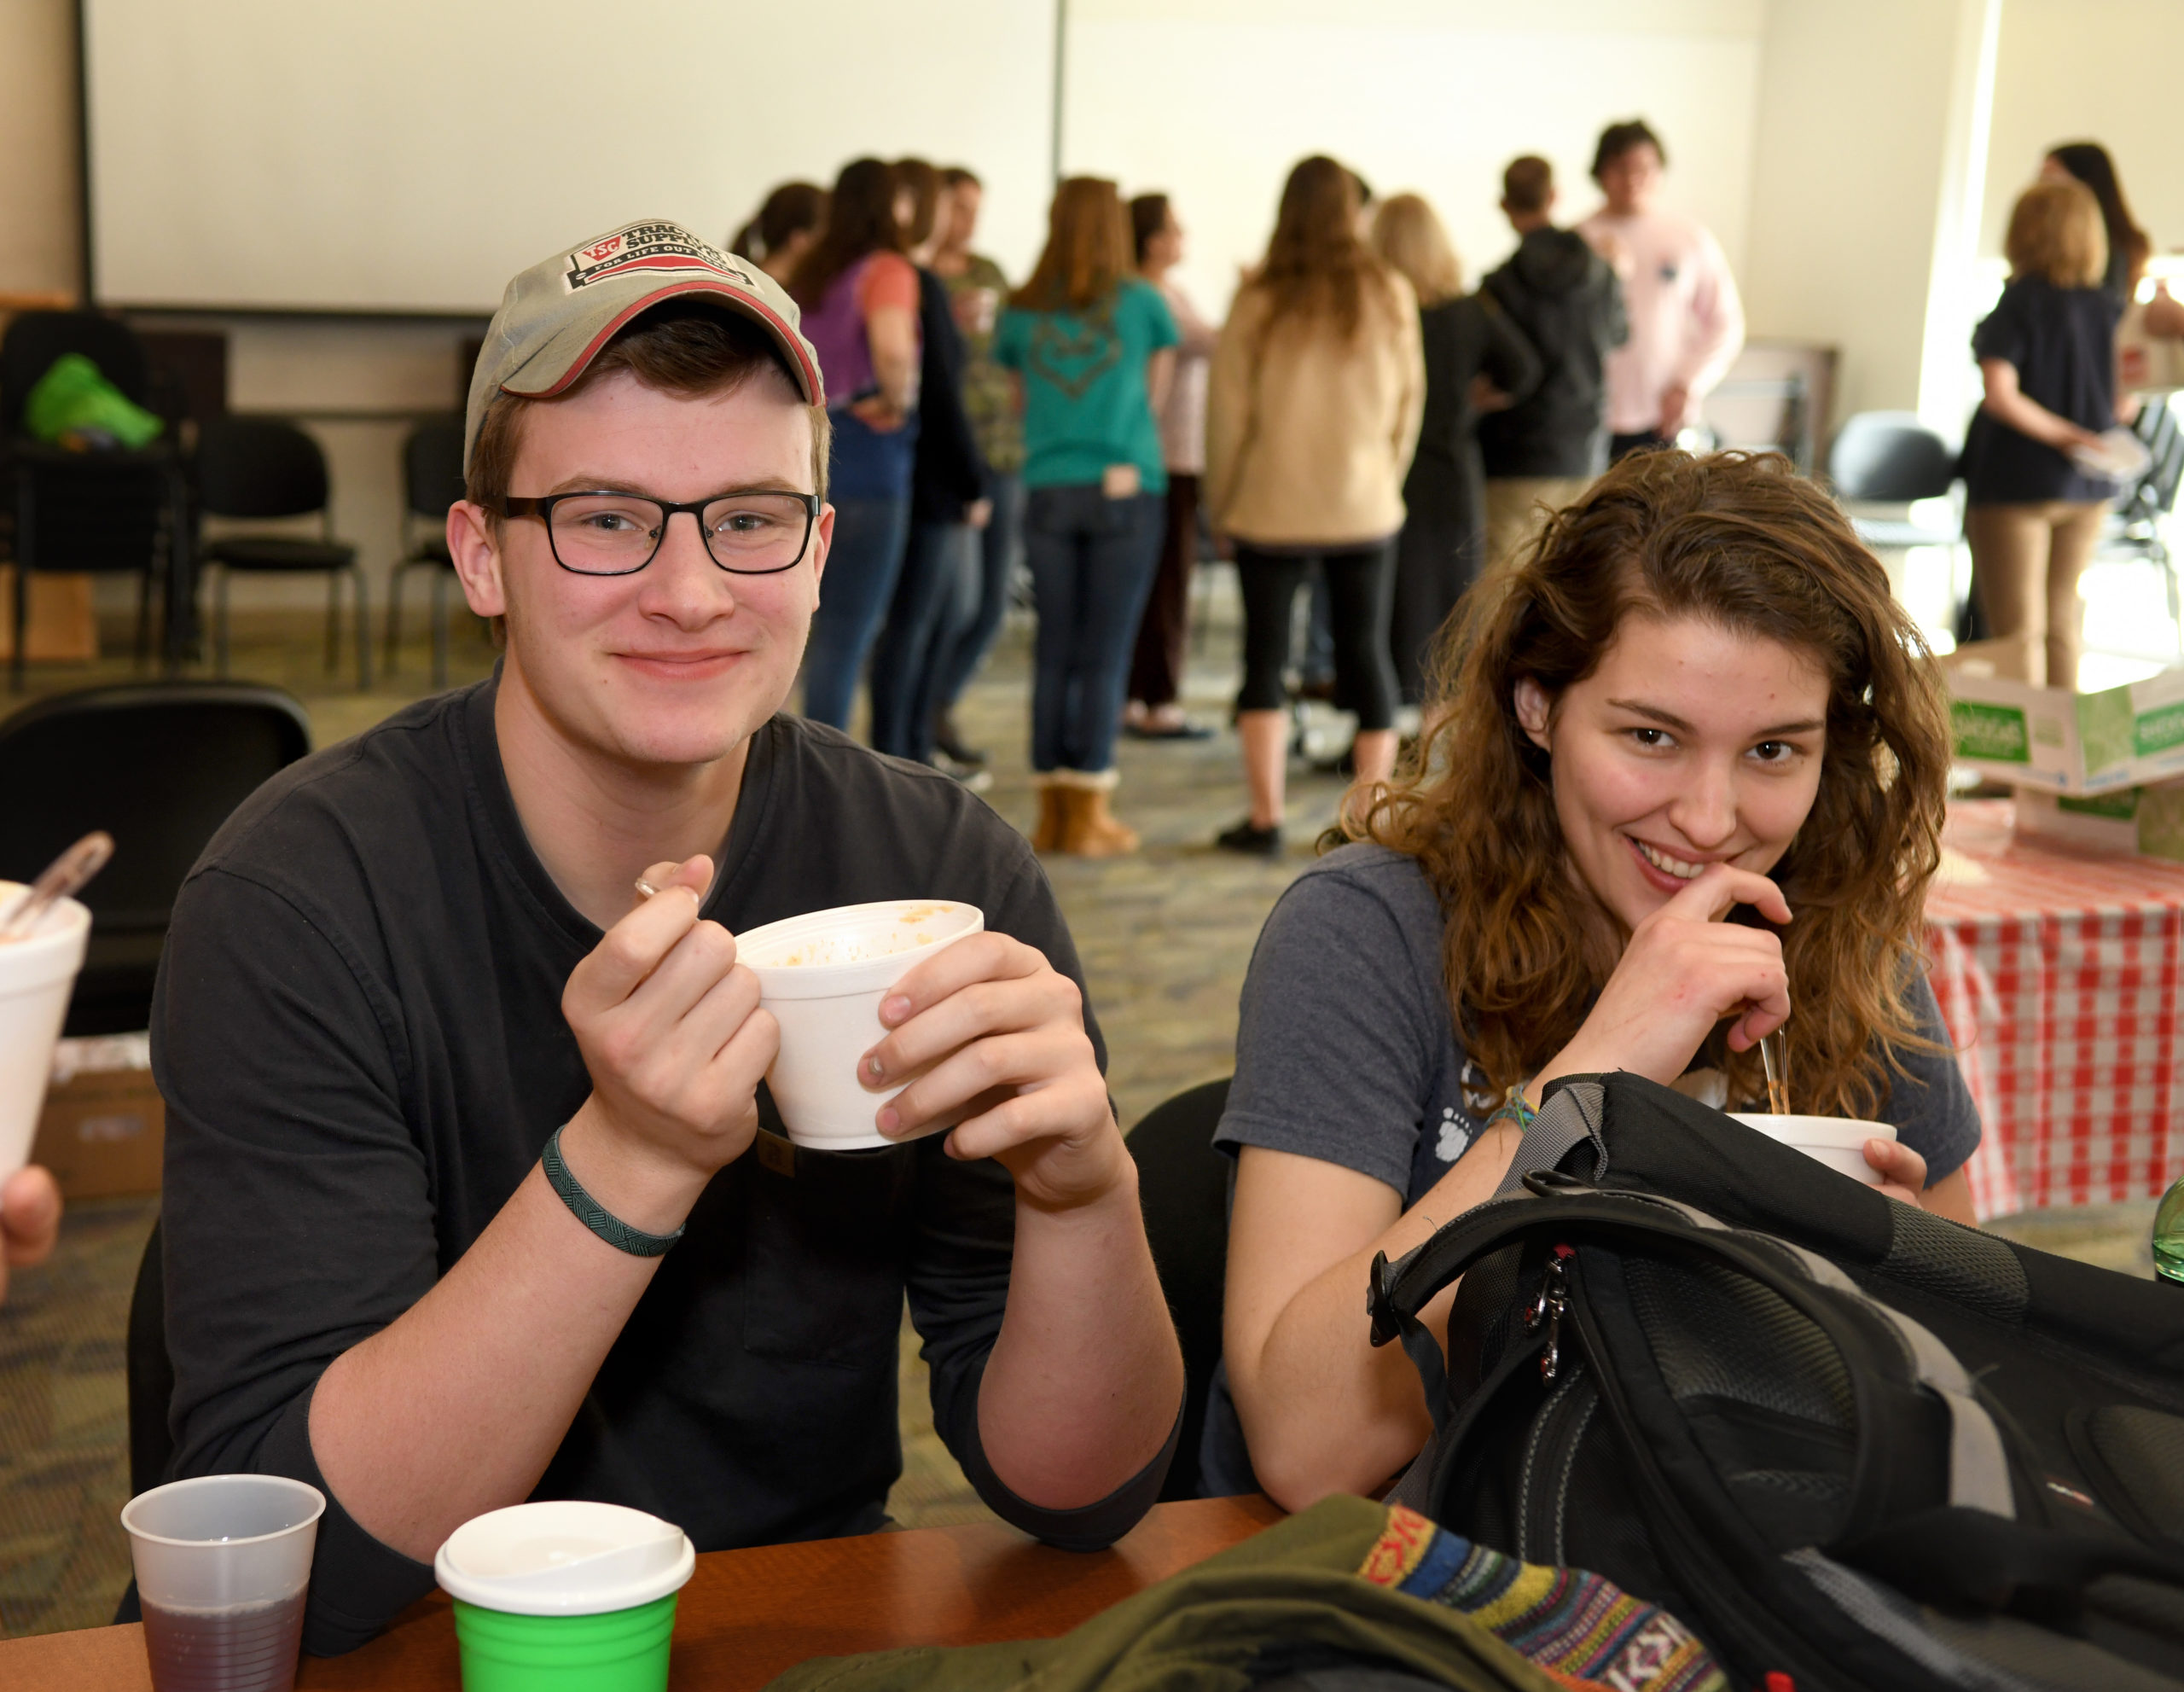 candid shot of students at chili cookoff